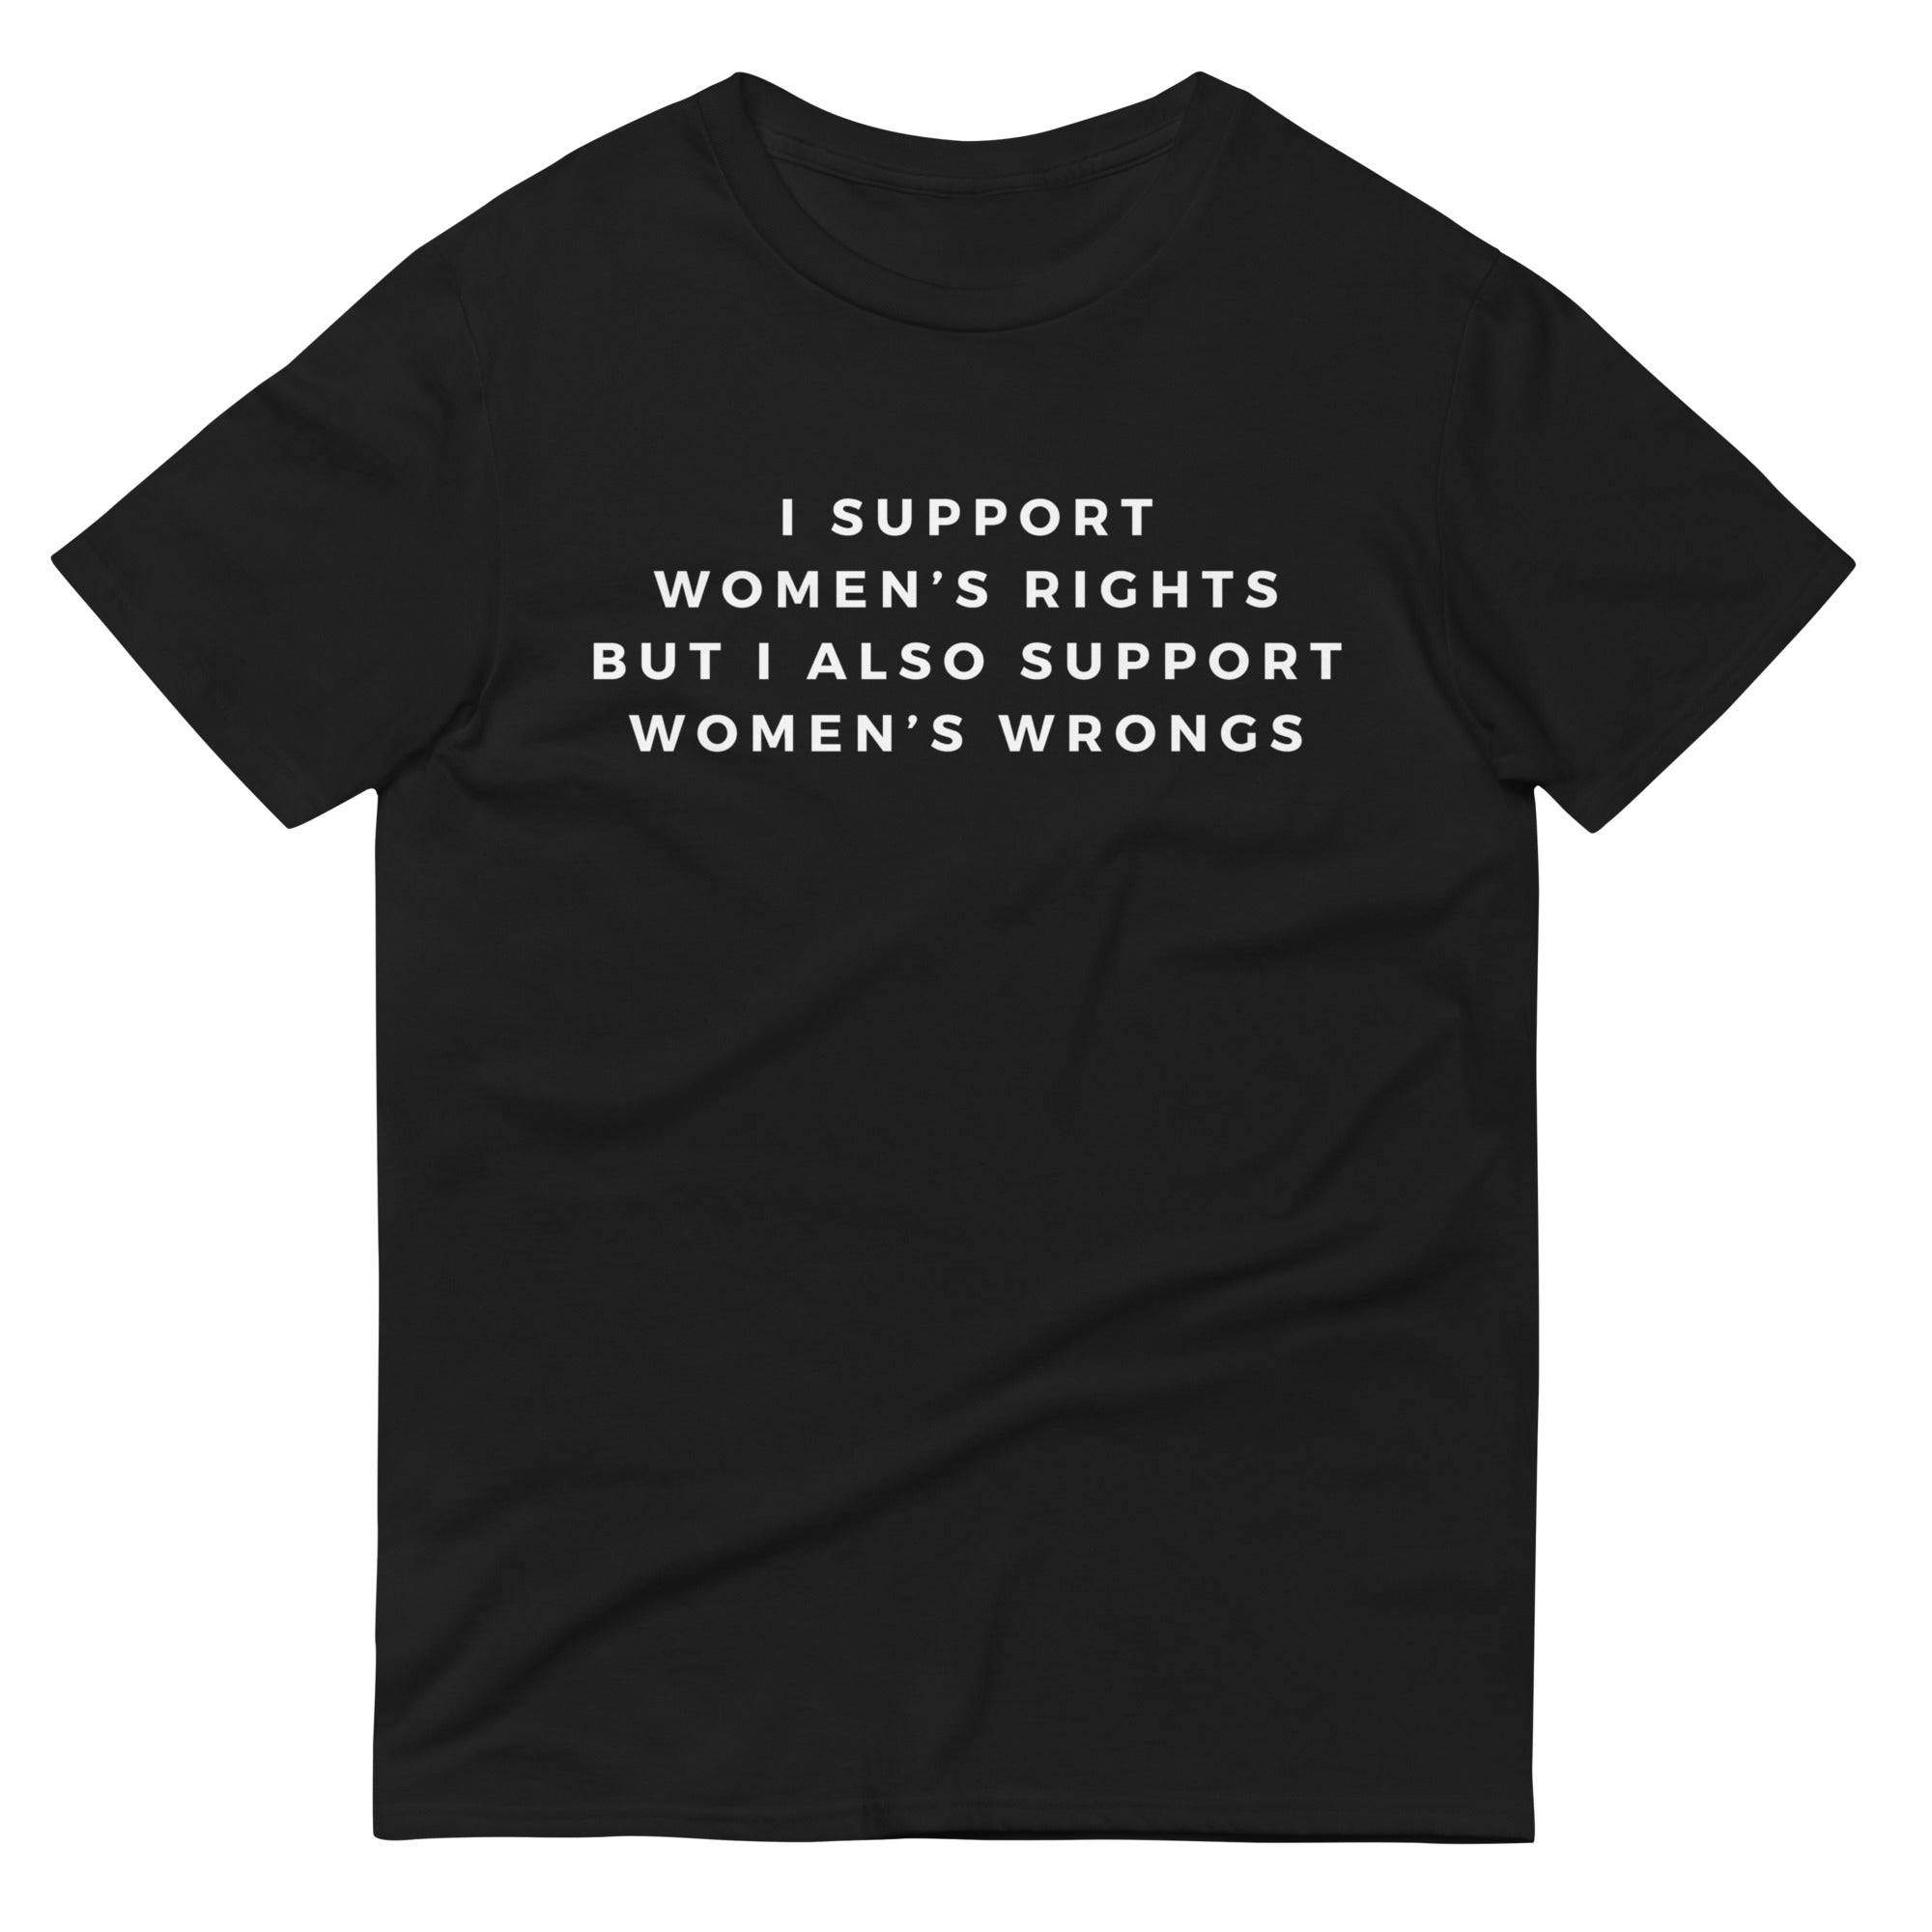 I support Women's Rights but I also Support Women's WrongsShort-Sleeve T-Shirt - Rose Gold Co. Shop